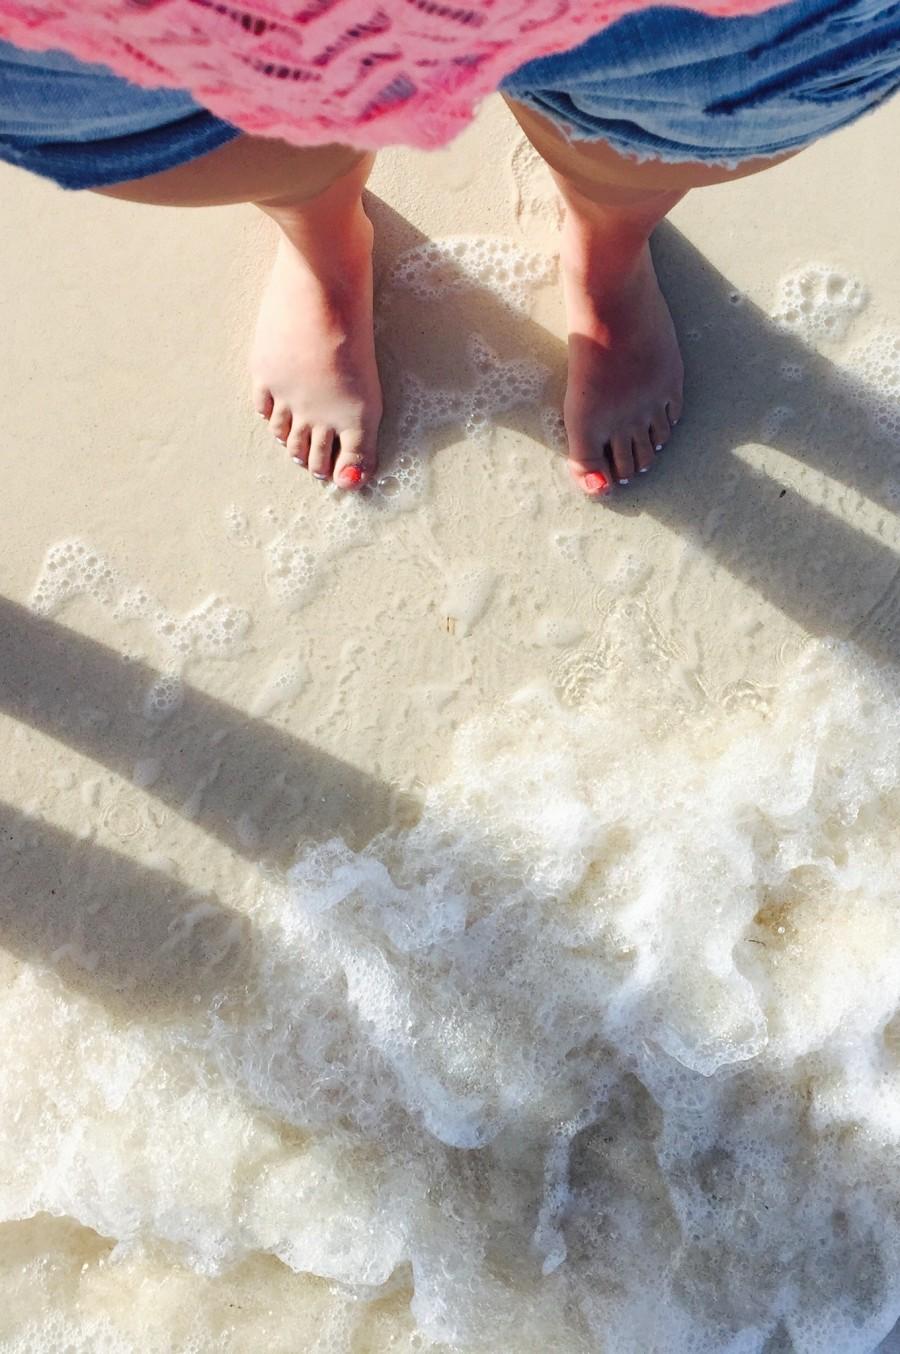 I dipped my toes into the Atlantic Ocean for the last time in the Bahamas.